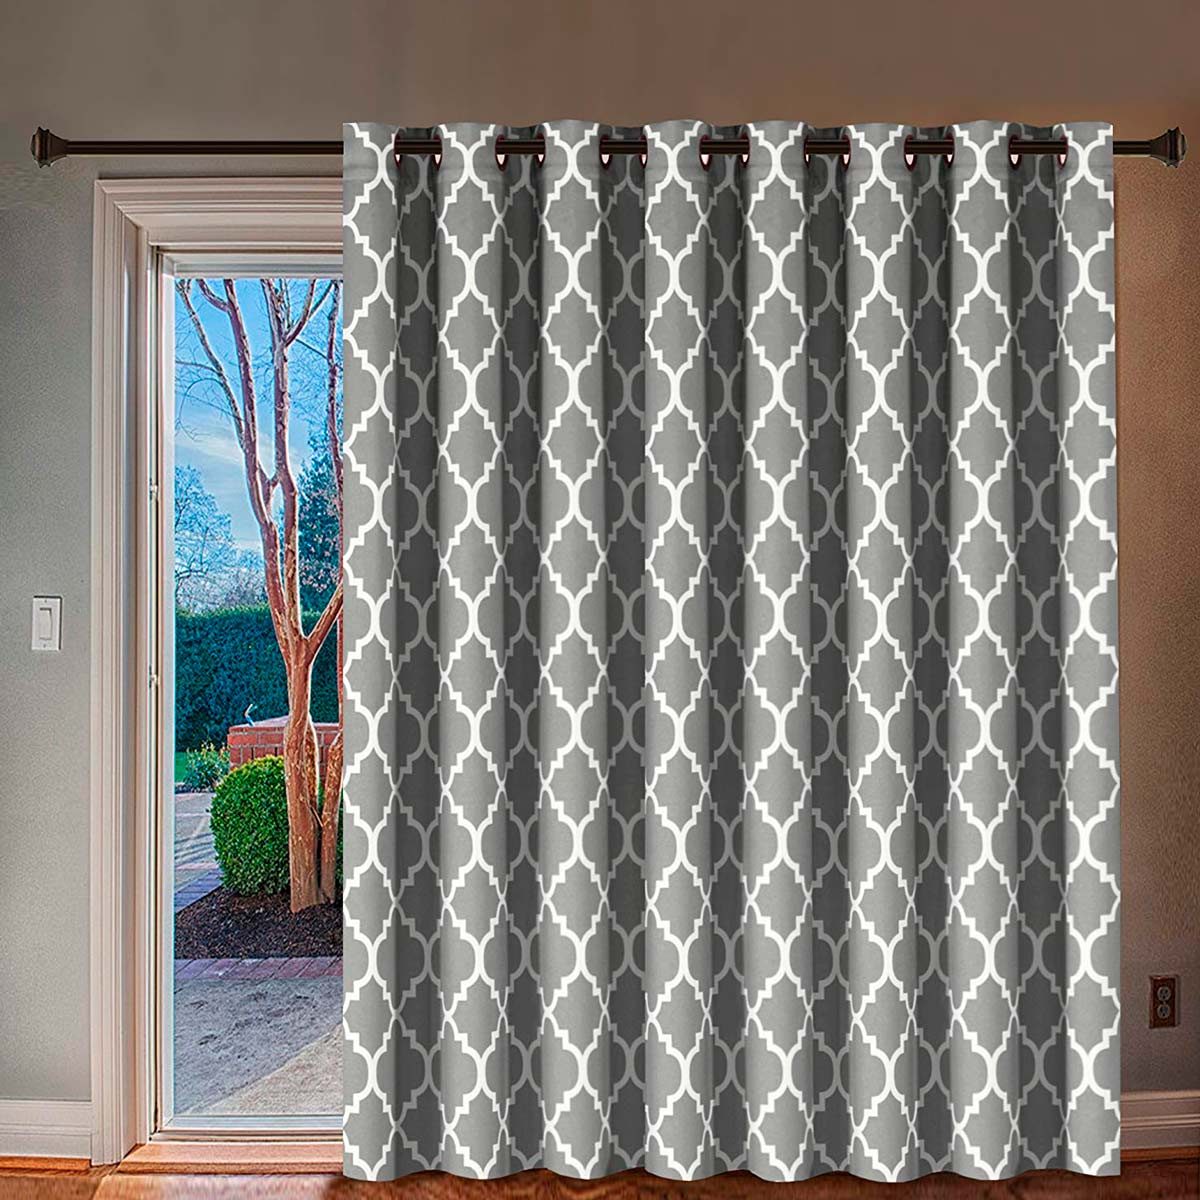 White French Door Curtains Ideas